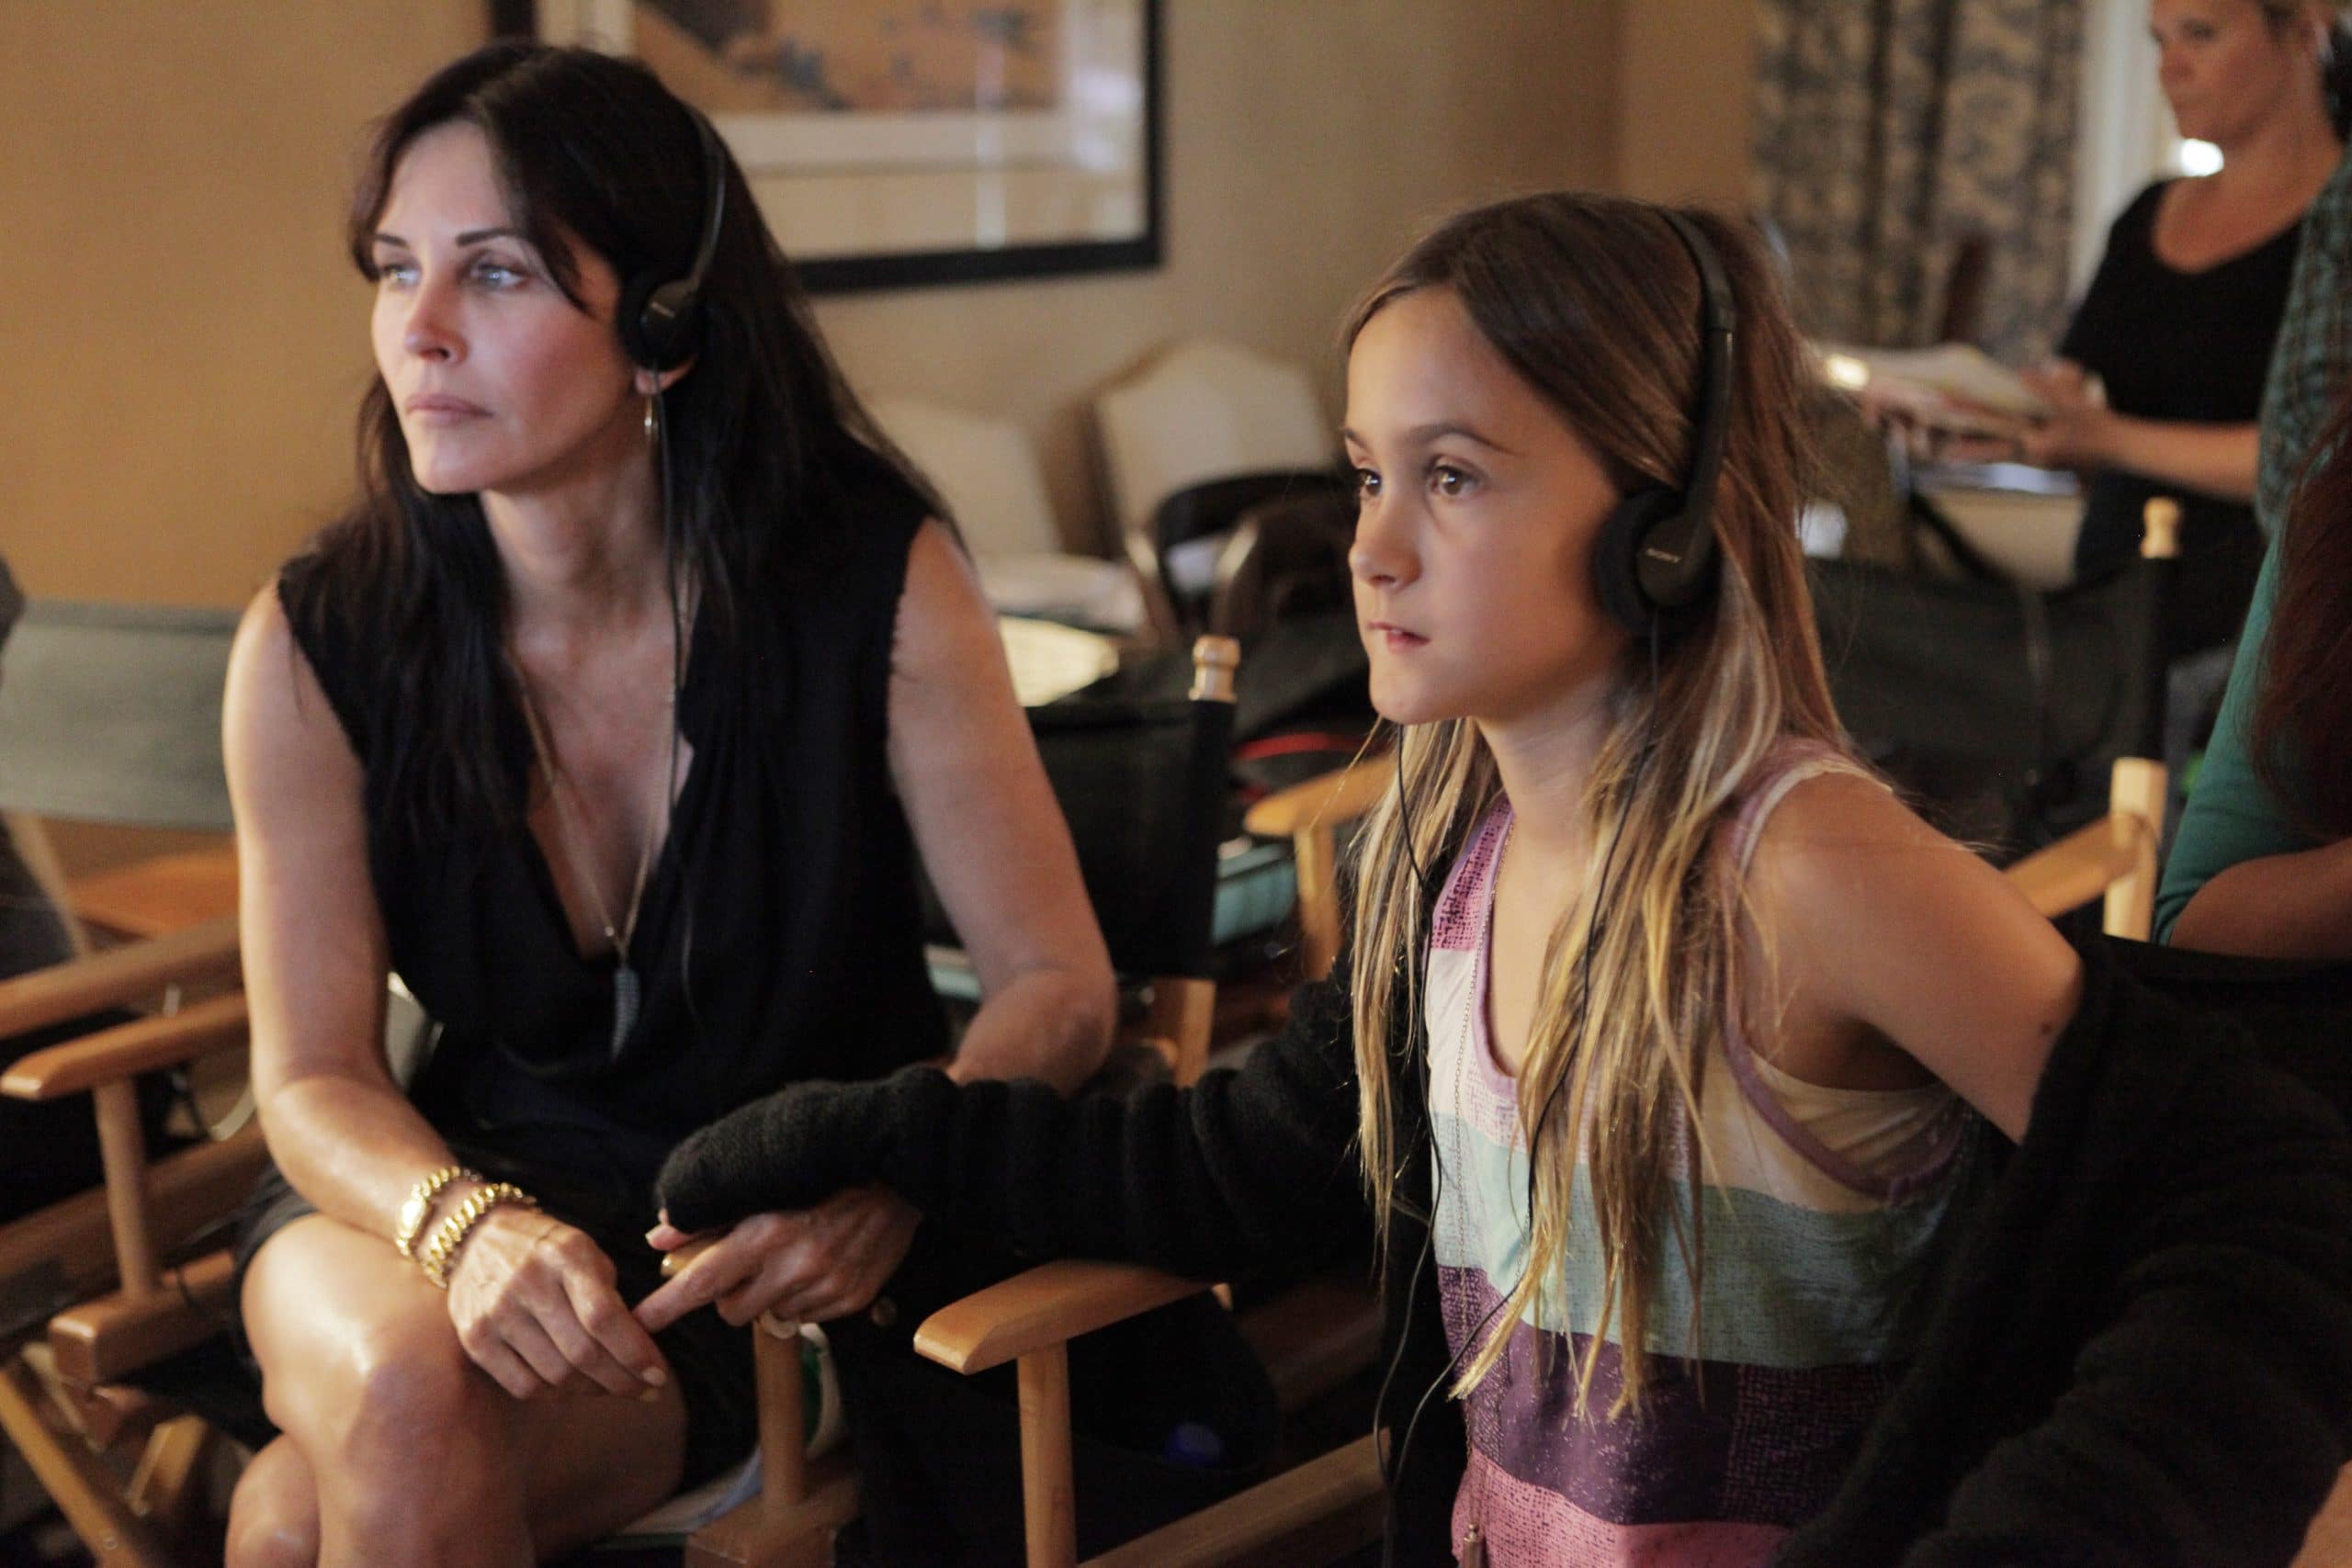 JUST BEFORE I GO, from left: director Courteney Cox, Coco Arquette, on set, 2014